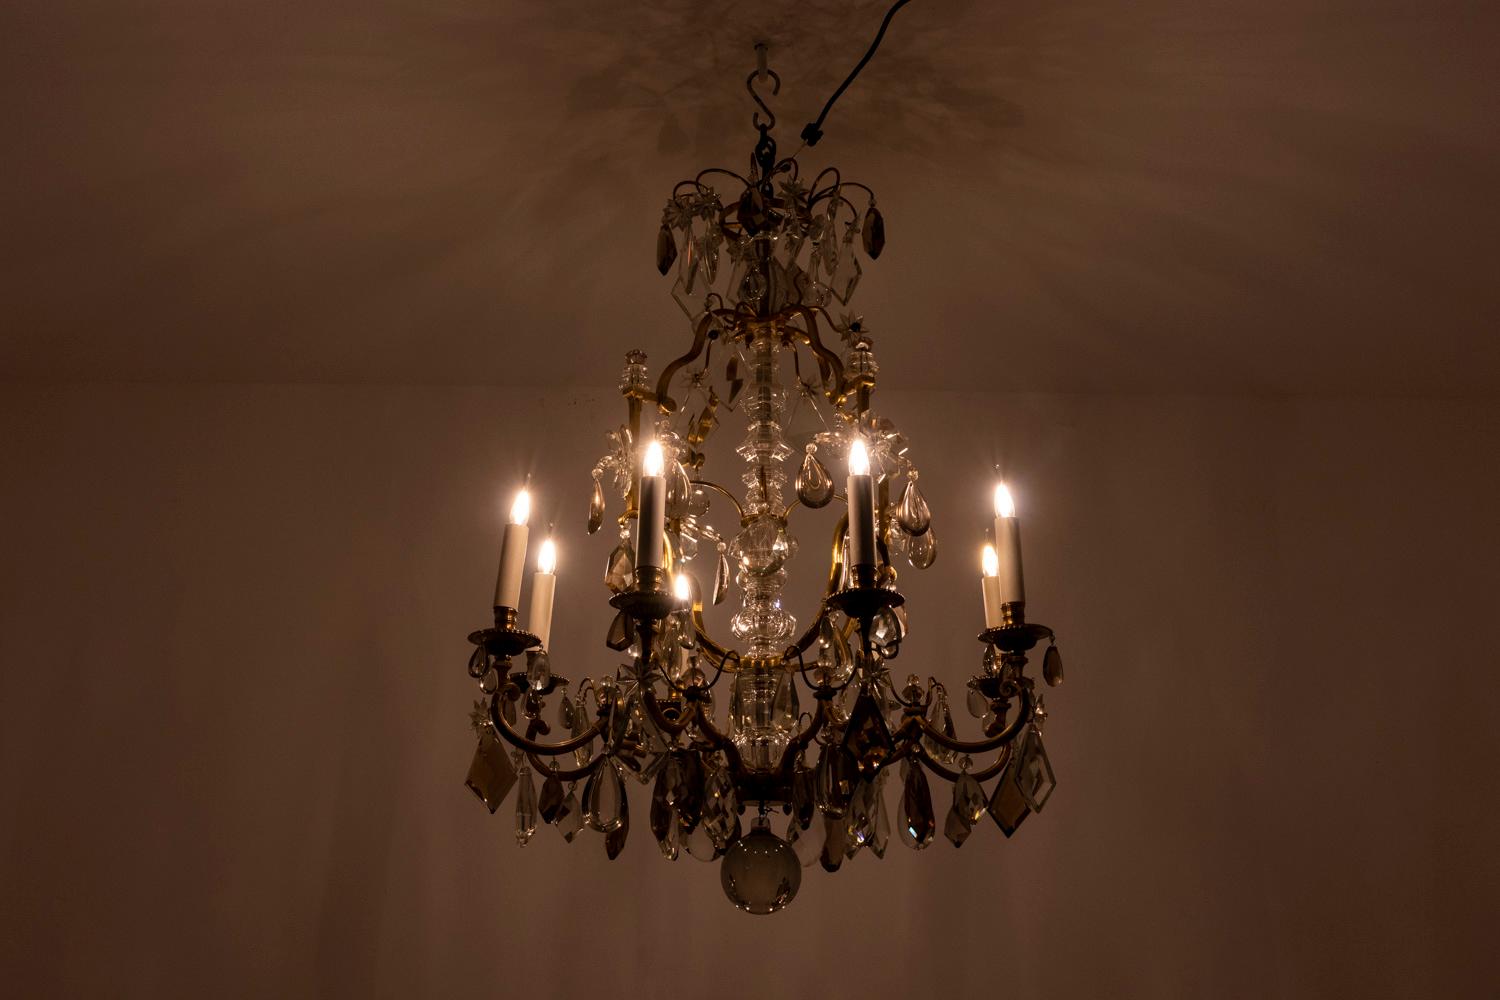 Maison Baguès, attributed to.

“Cage” chandelier with eight arms of light in gilded bronze in the shape of an S and crystal pendants. Central shaft with cut crystal threading. Termination of the ball-shaped chandelier. Sconces adorned with